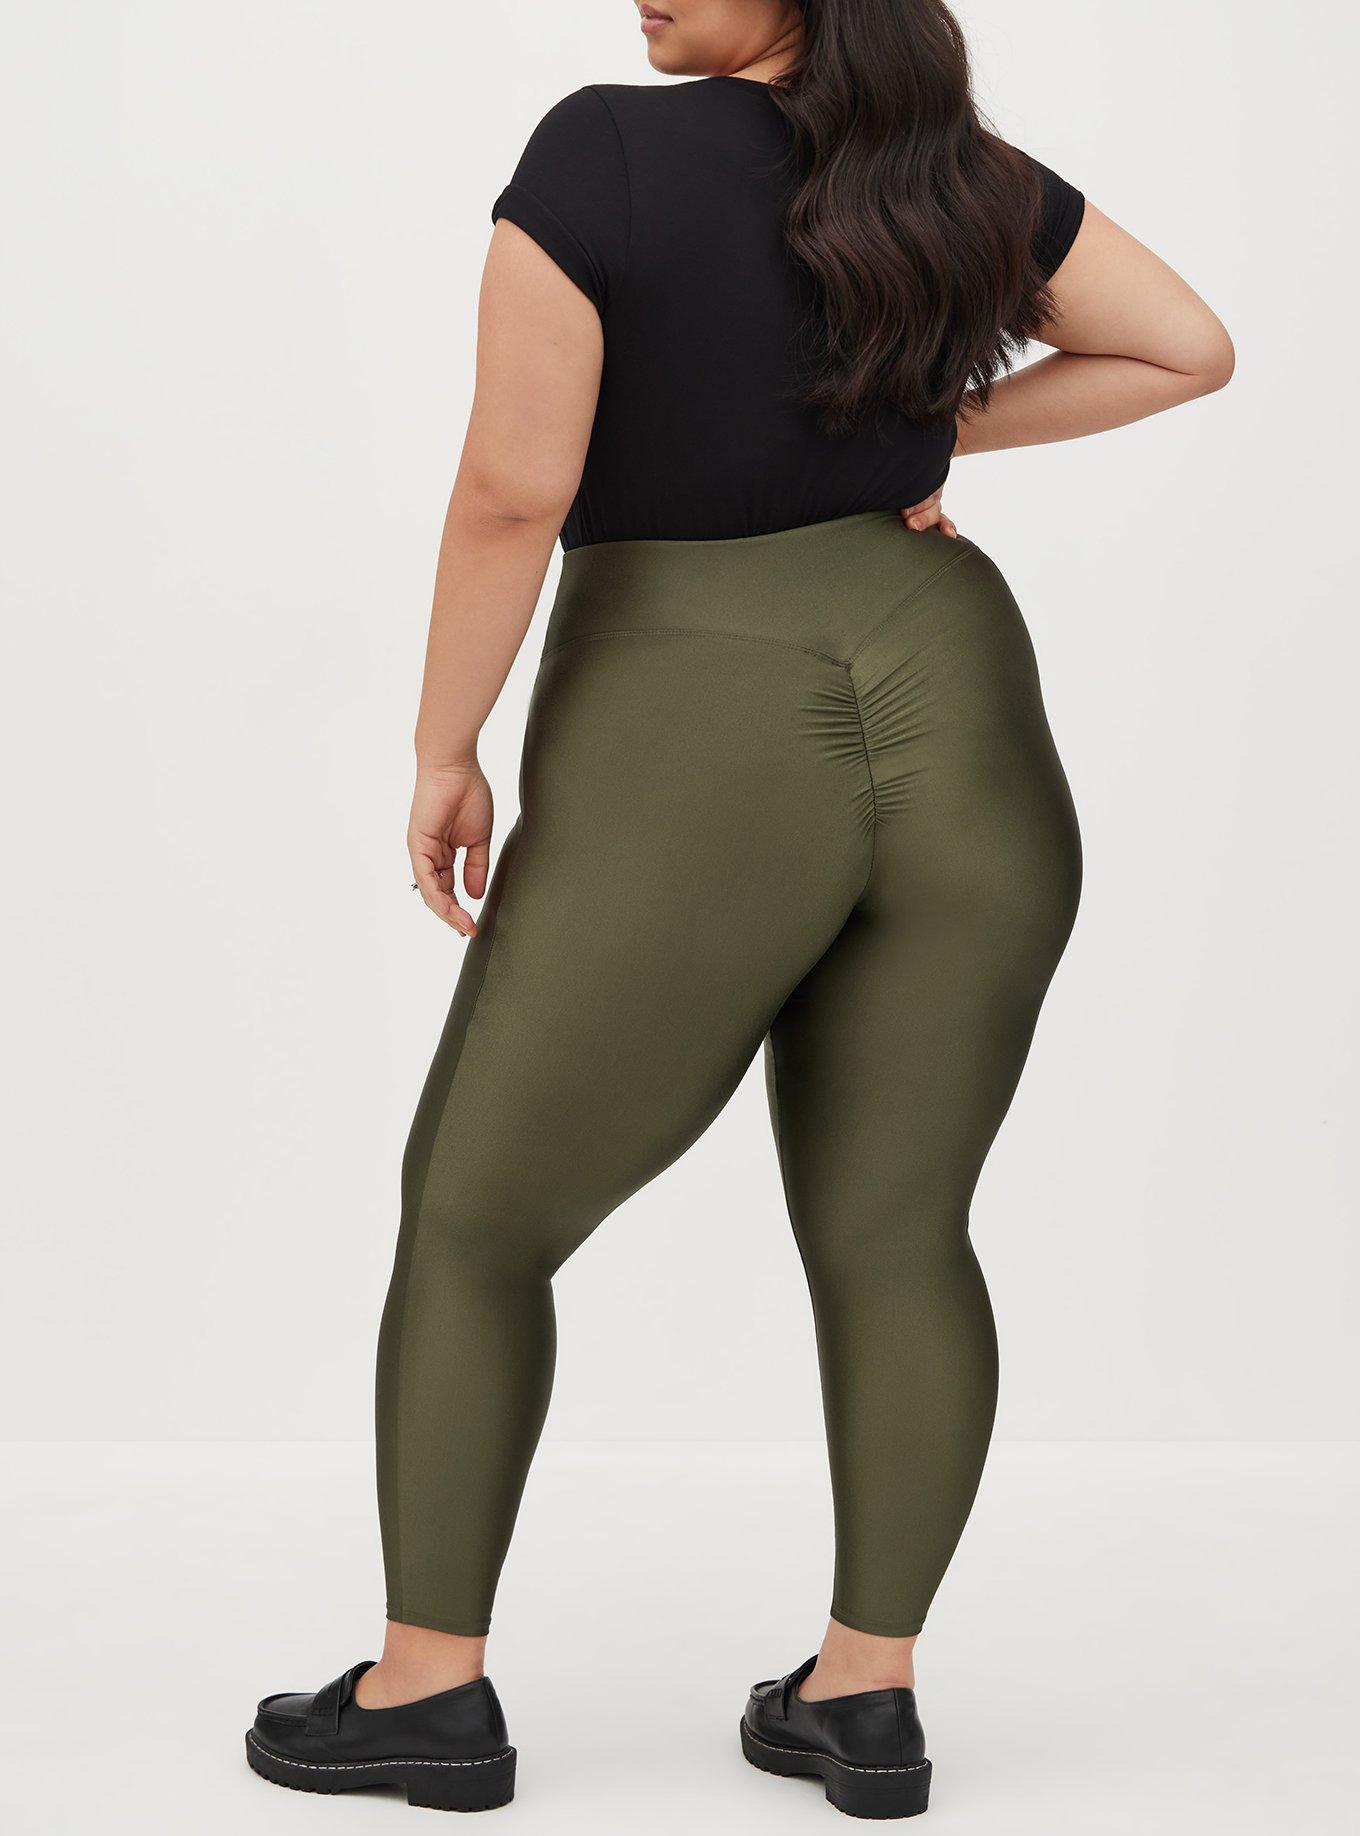 Women's Plus Size New Mix Brand 3 Waistband Solid Peach Skin Leggings. -  3 Elastic Waistband - Full-Length - Inseam approximately 28 - One size  fits most plus 16-20 - 92% Polyester / 8% Spandex, 738986